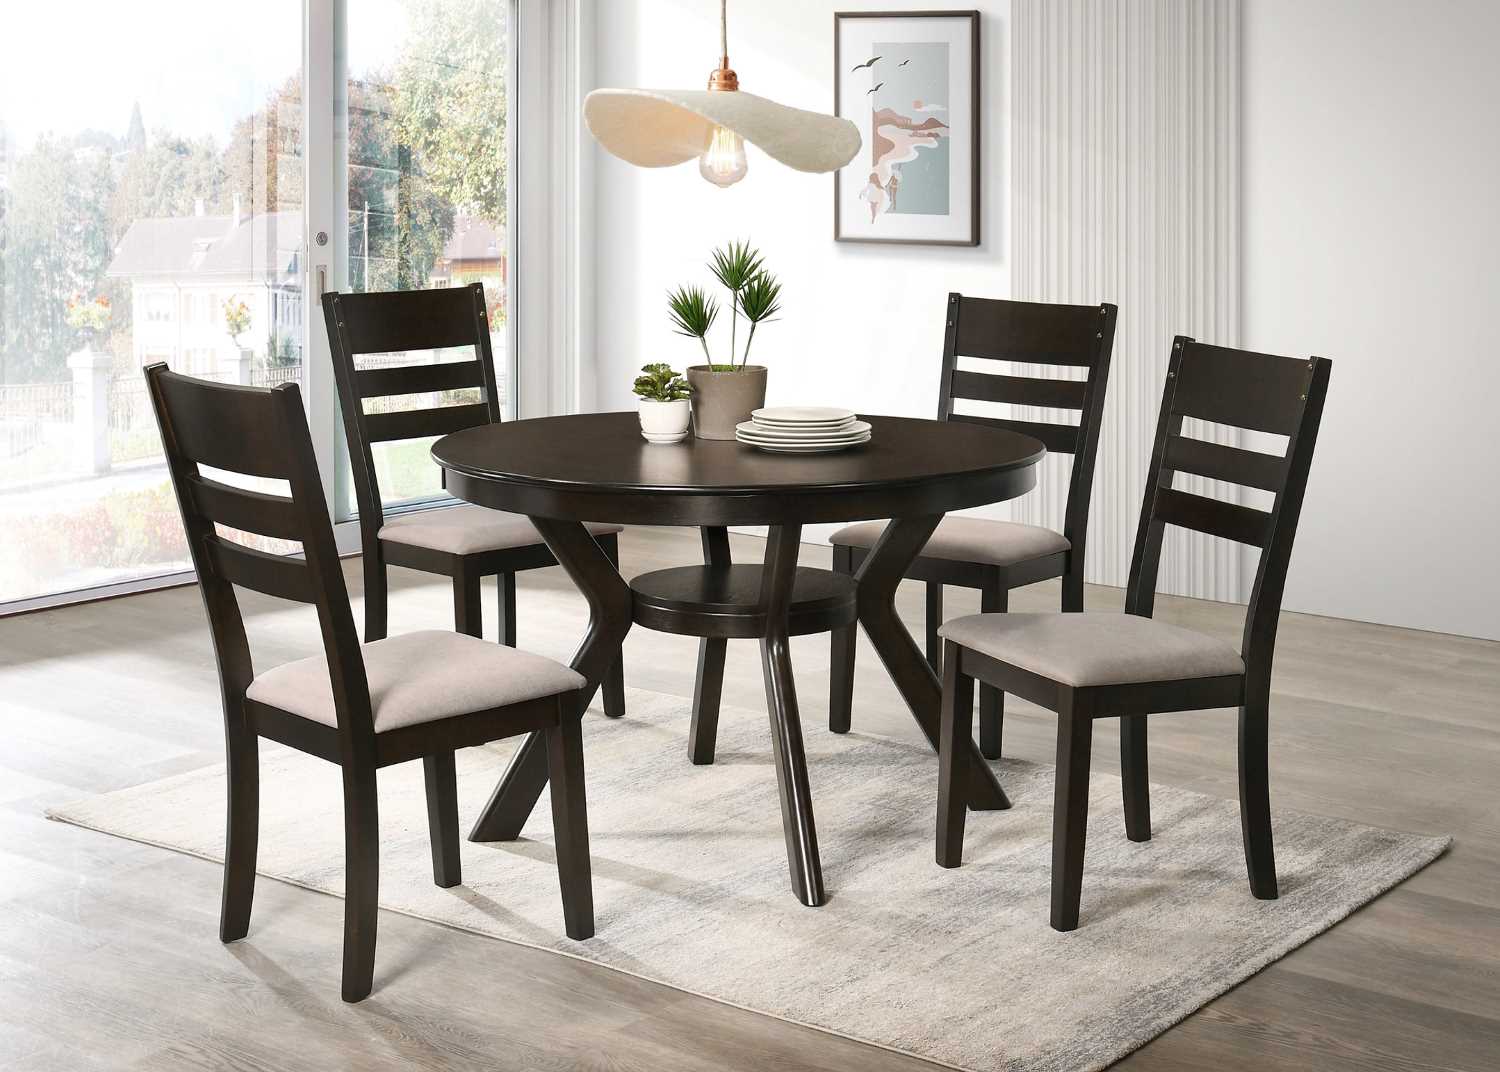 Dining Collection Espresso T-1085 / C-1092